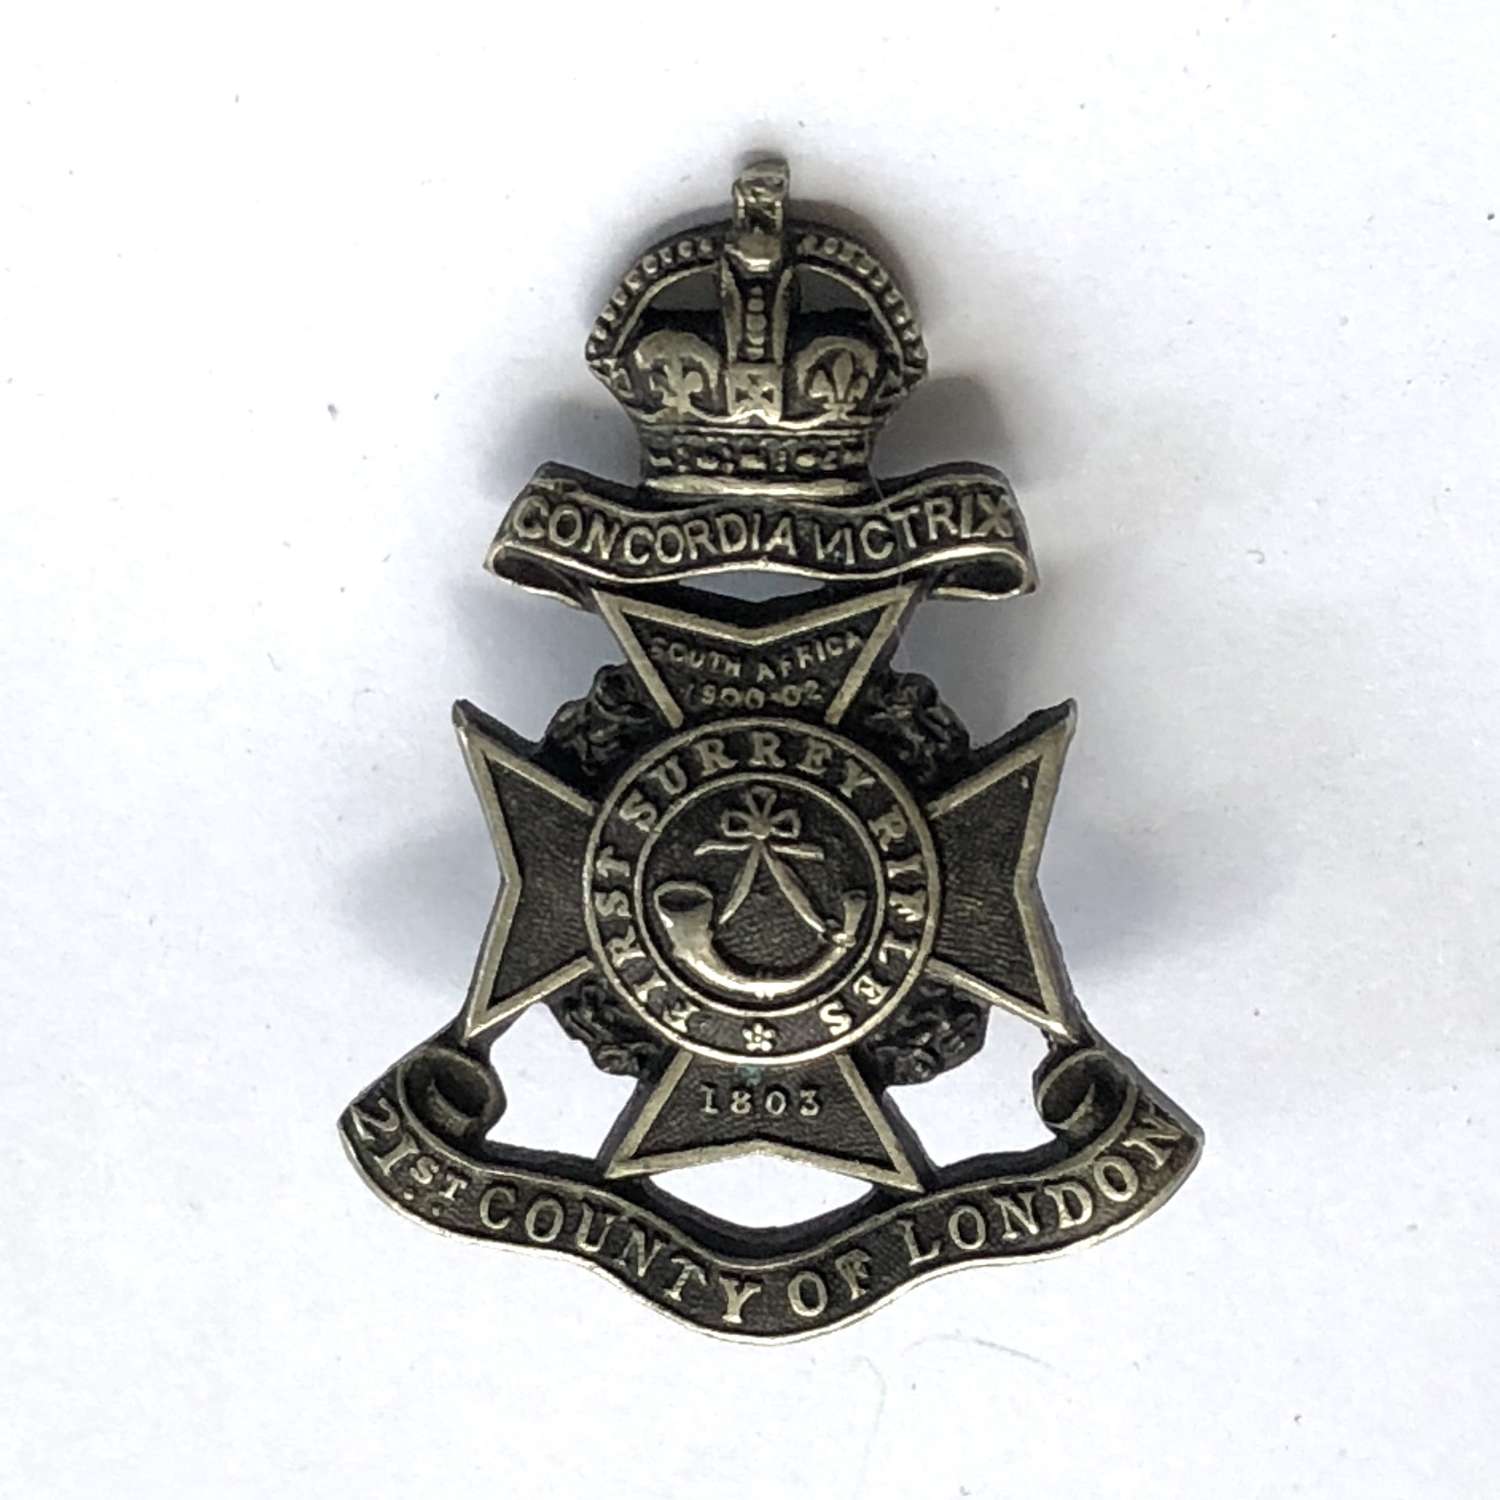 21st County of London Officer's cap badge